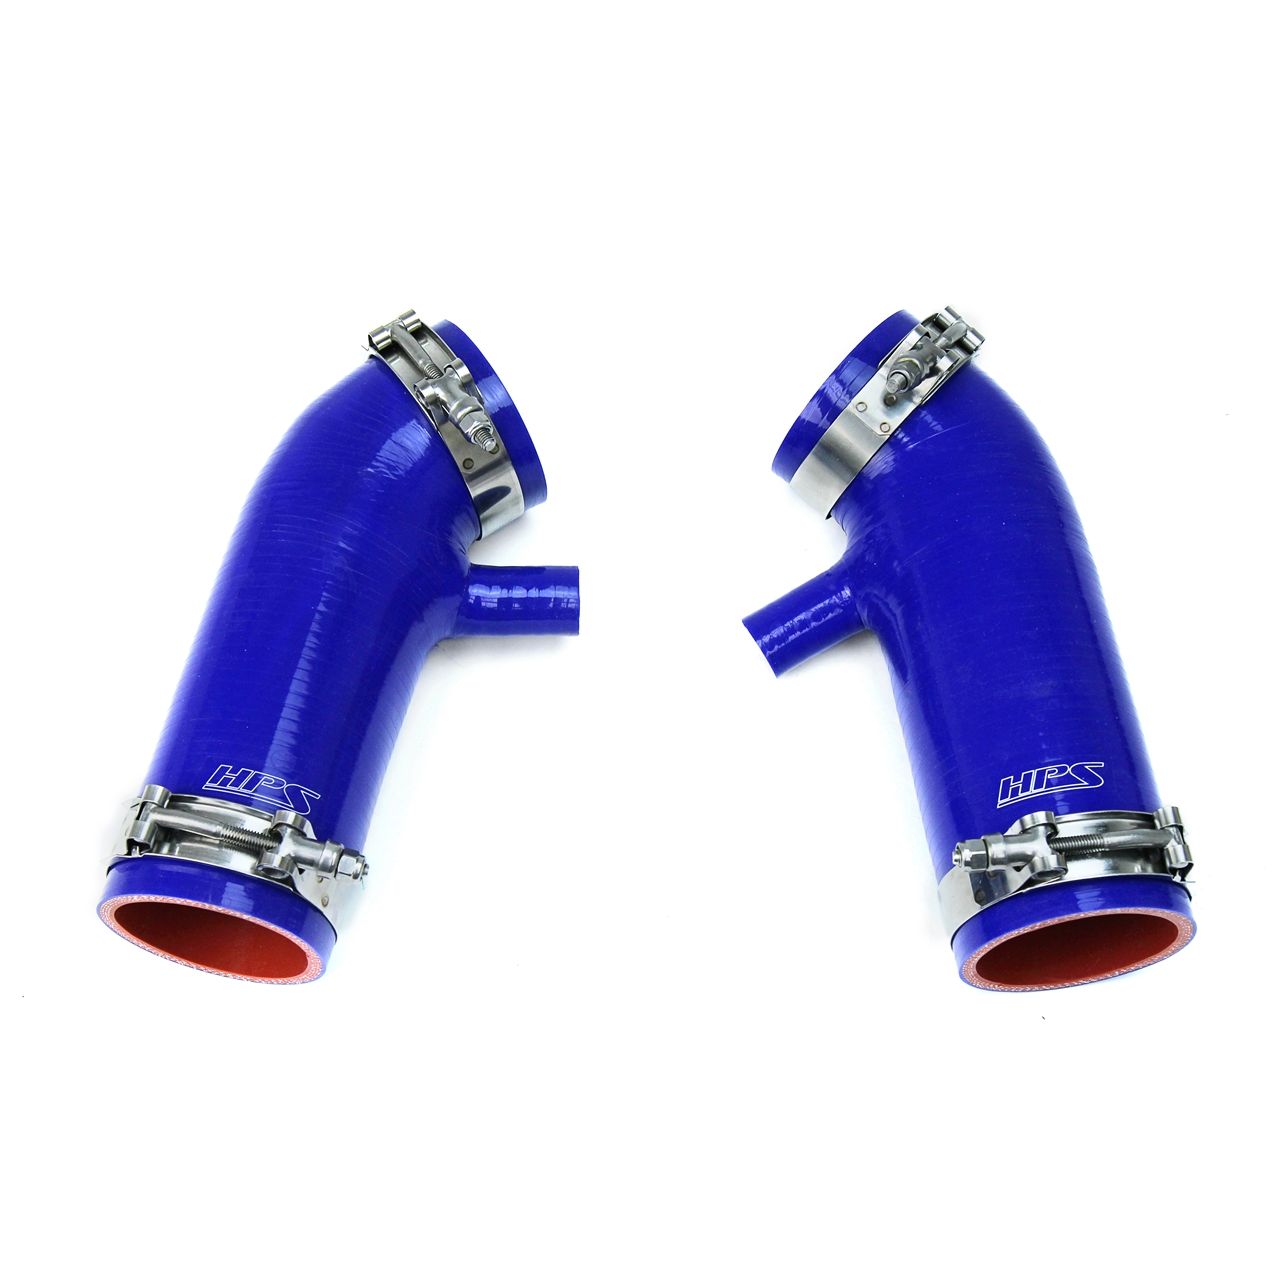 HPS Blue Reinforced Silicone Post MAF Air Intake Hose Kit for Infiniti 08-09 EX35 3.7L